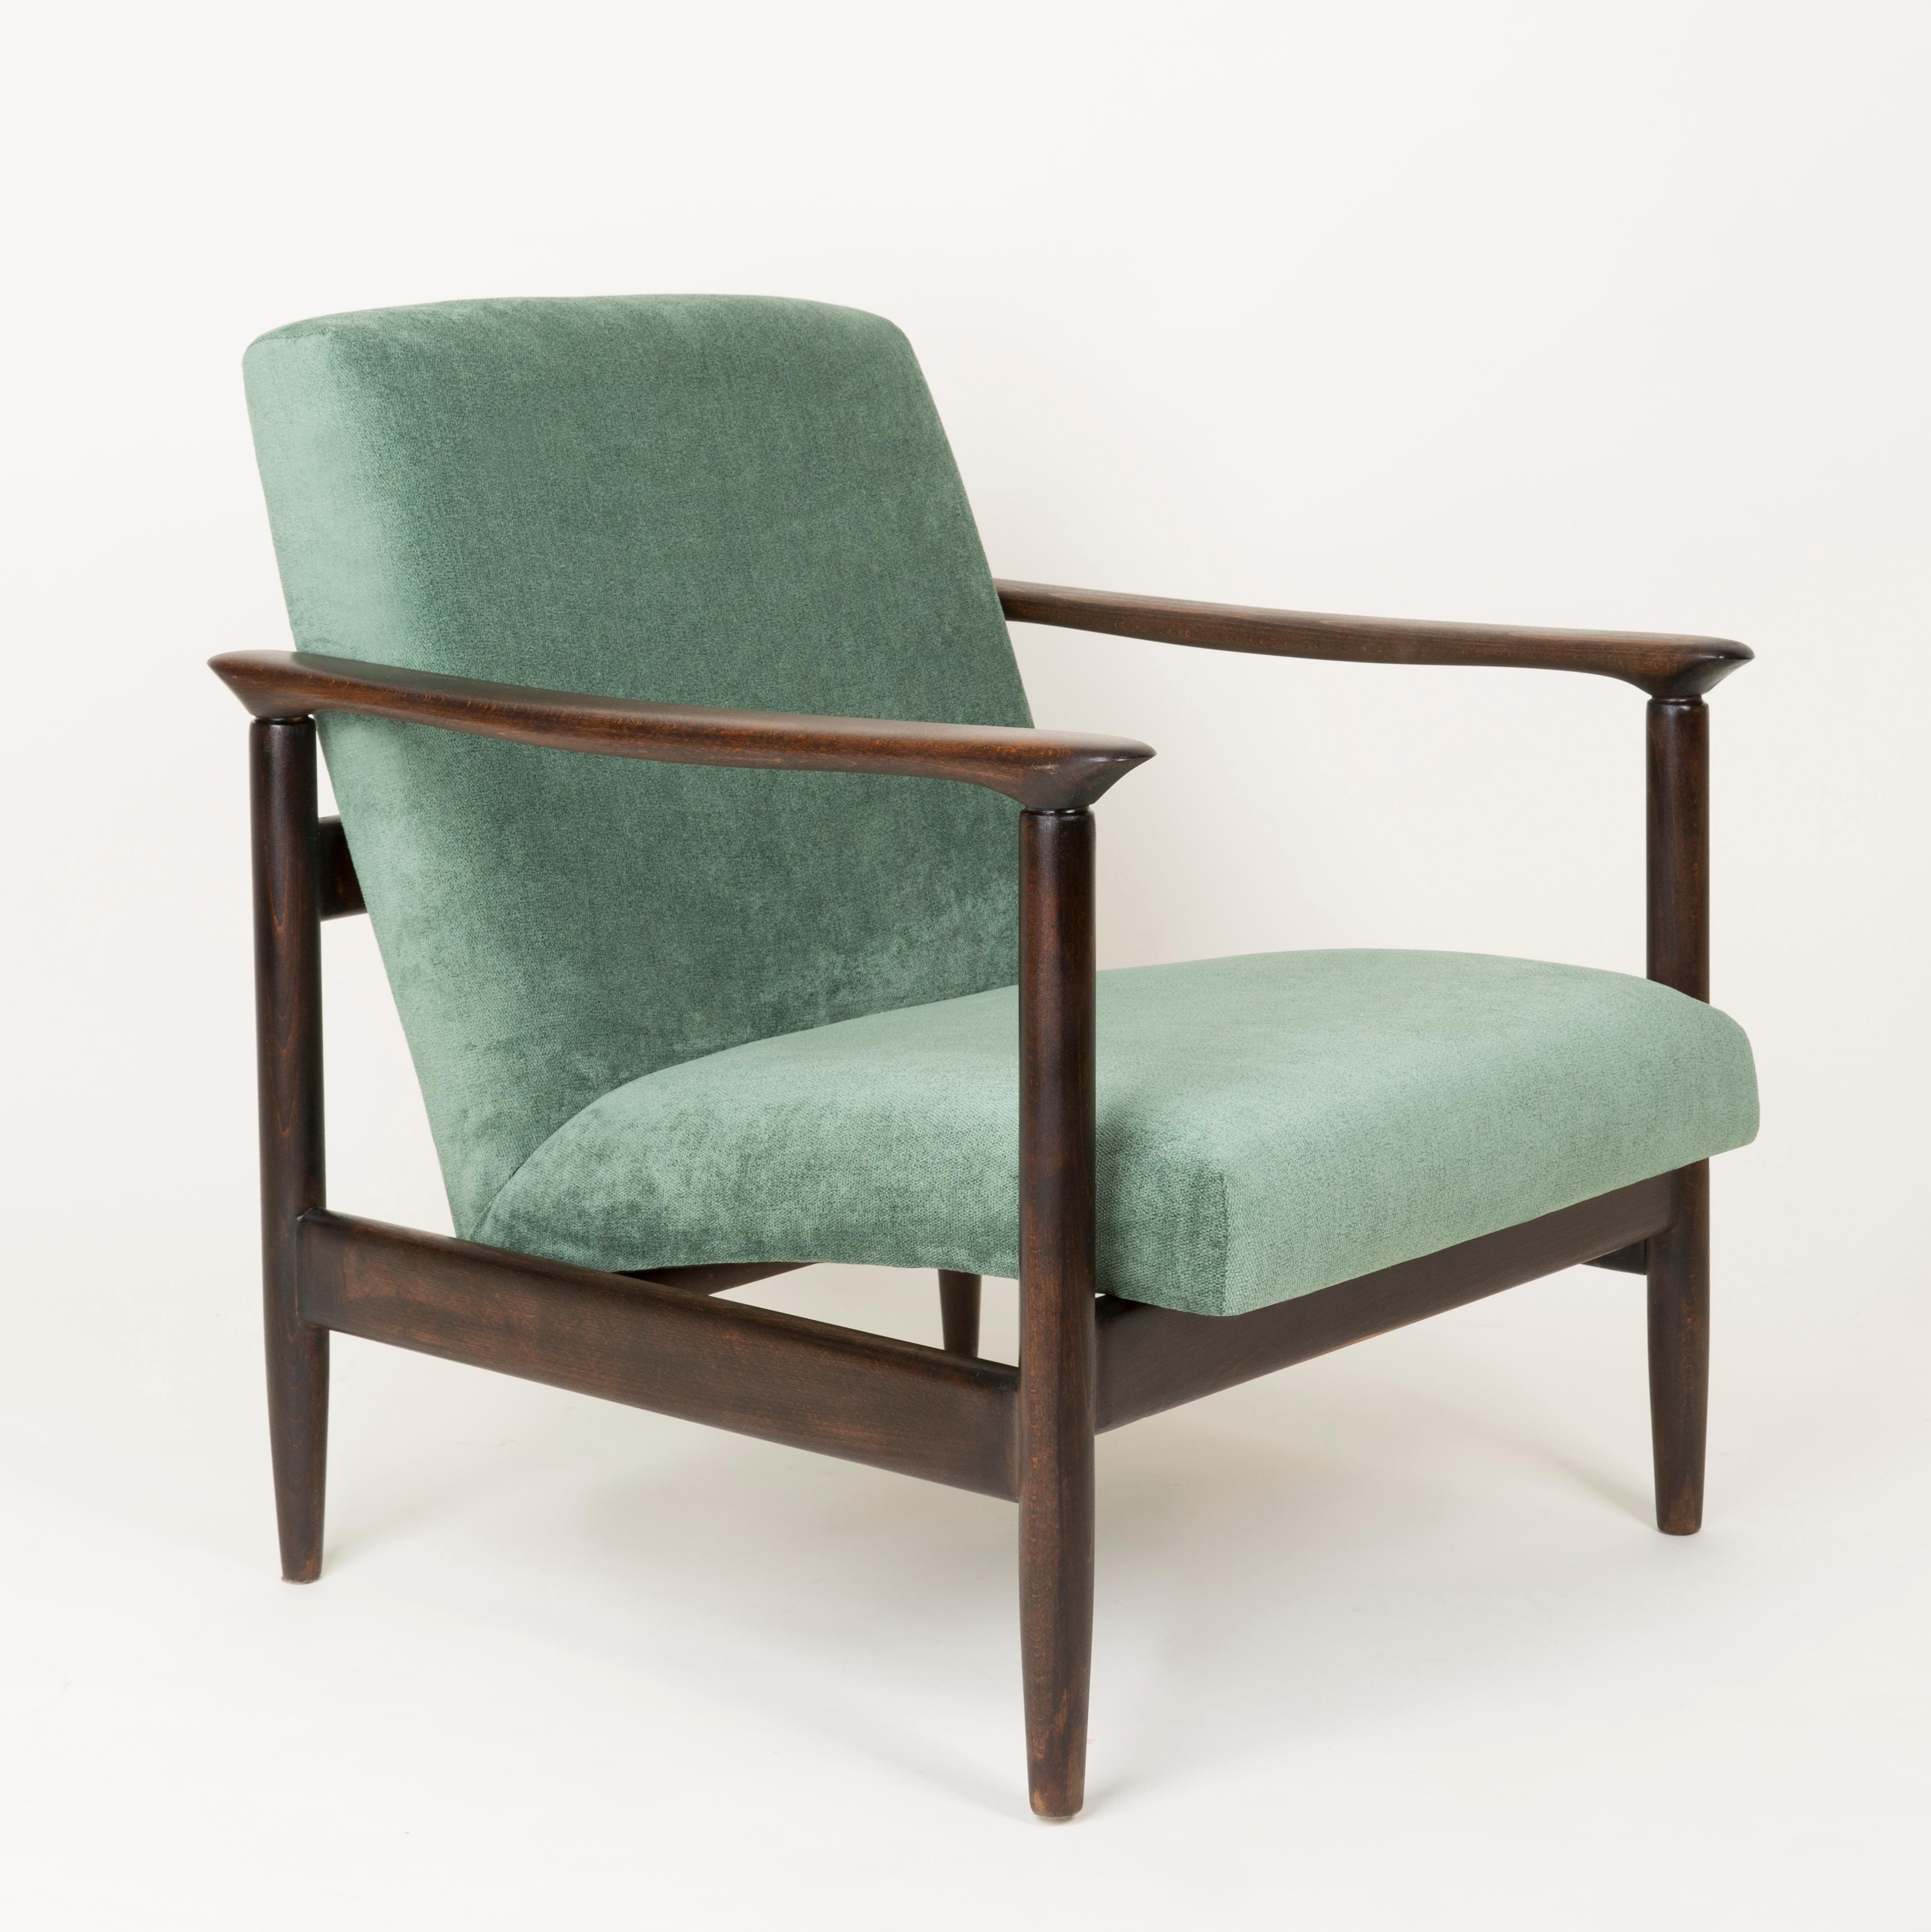 Set of armchair and foot stool GFM-142 type, designed by Edmund Homa. The armchair was made in the 1960s in the Gosciecinska Furniture Factory. They are made from solid beechwood. The GFM-142 armchair is regarded one of the best polish armchair